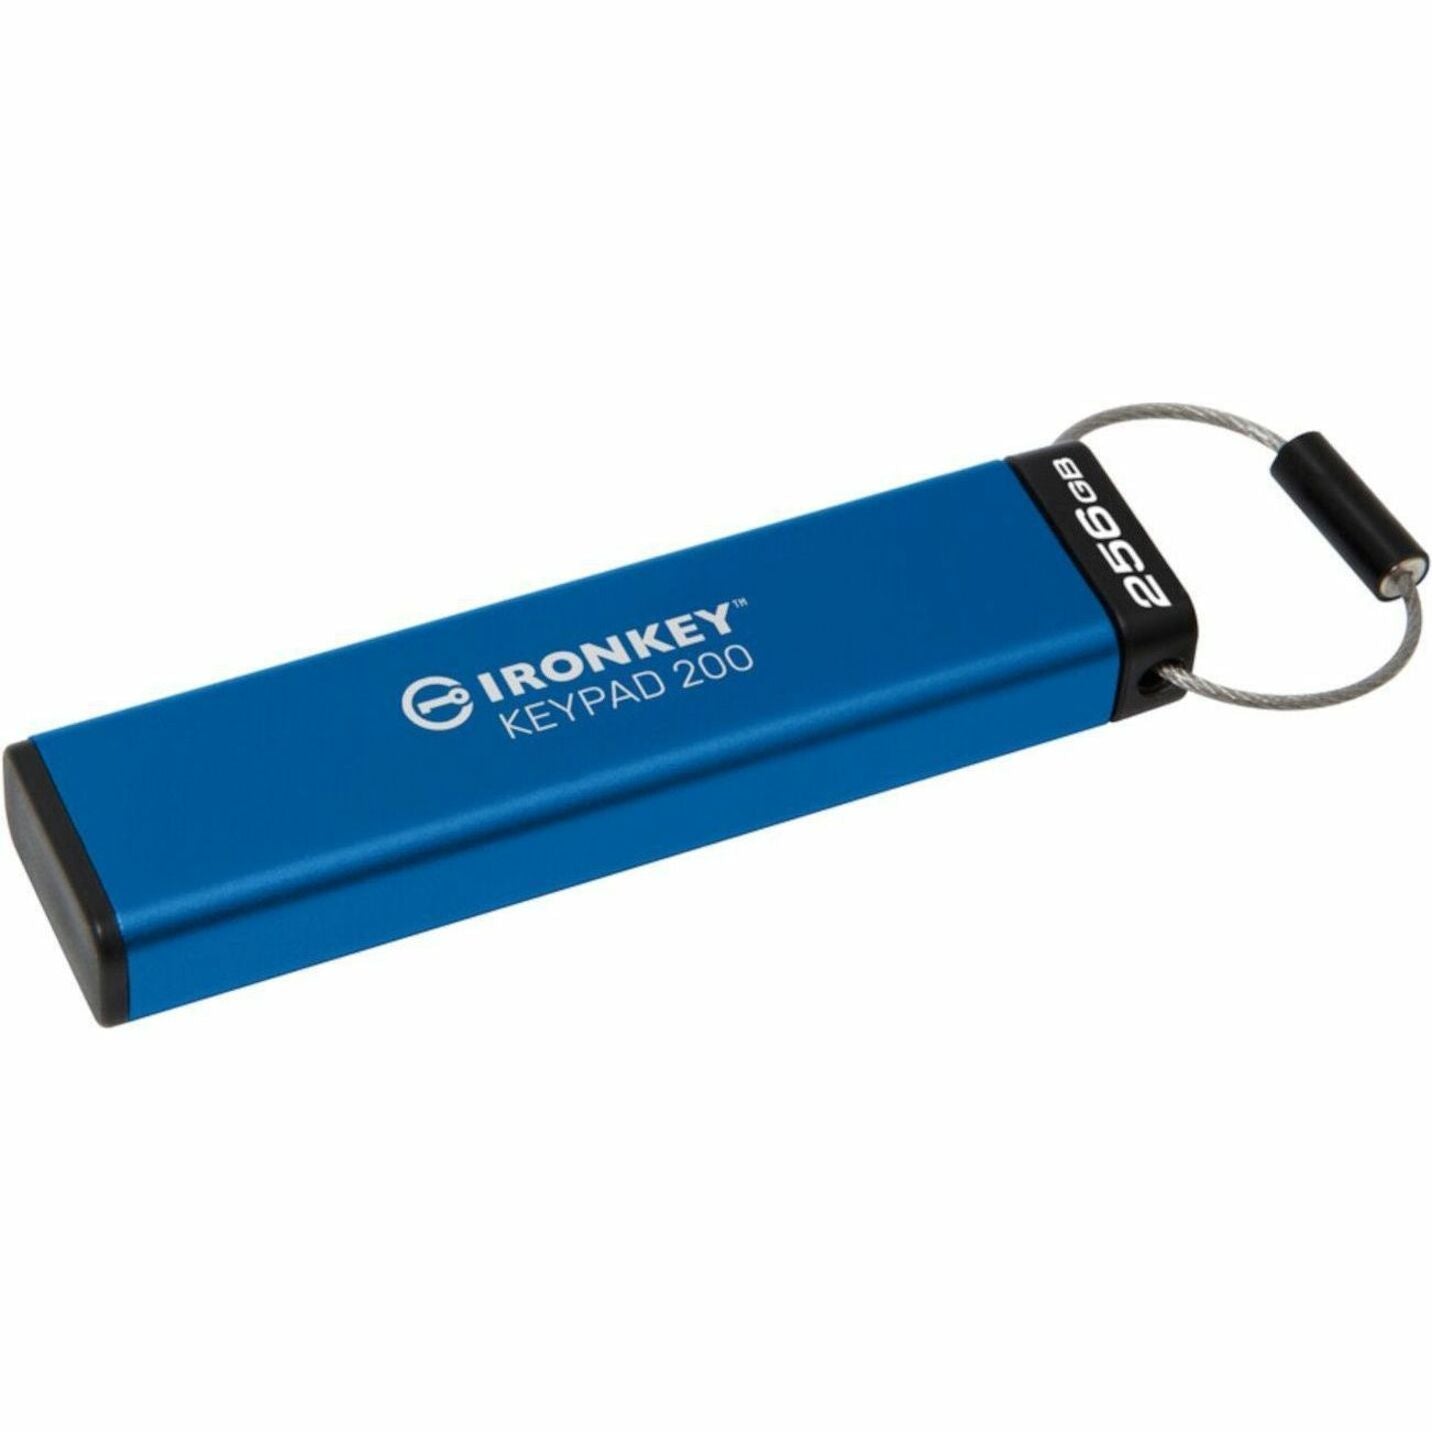 IronKey IKKP200/256GB Keypad 200 256GB USB 3.2 (Gen 1) Type A Flash Drive, Digitally Signed Secure Firmware, Customizable PIN, Tamper Resistant, Dust Proof, Water Proof, PIN Pad Protection